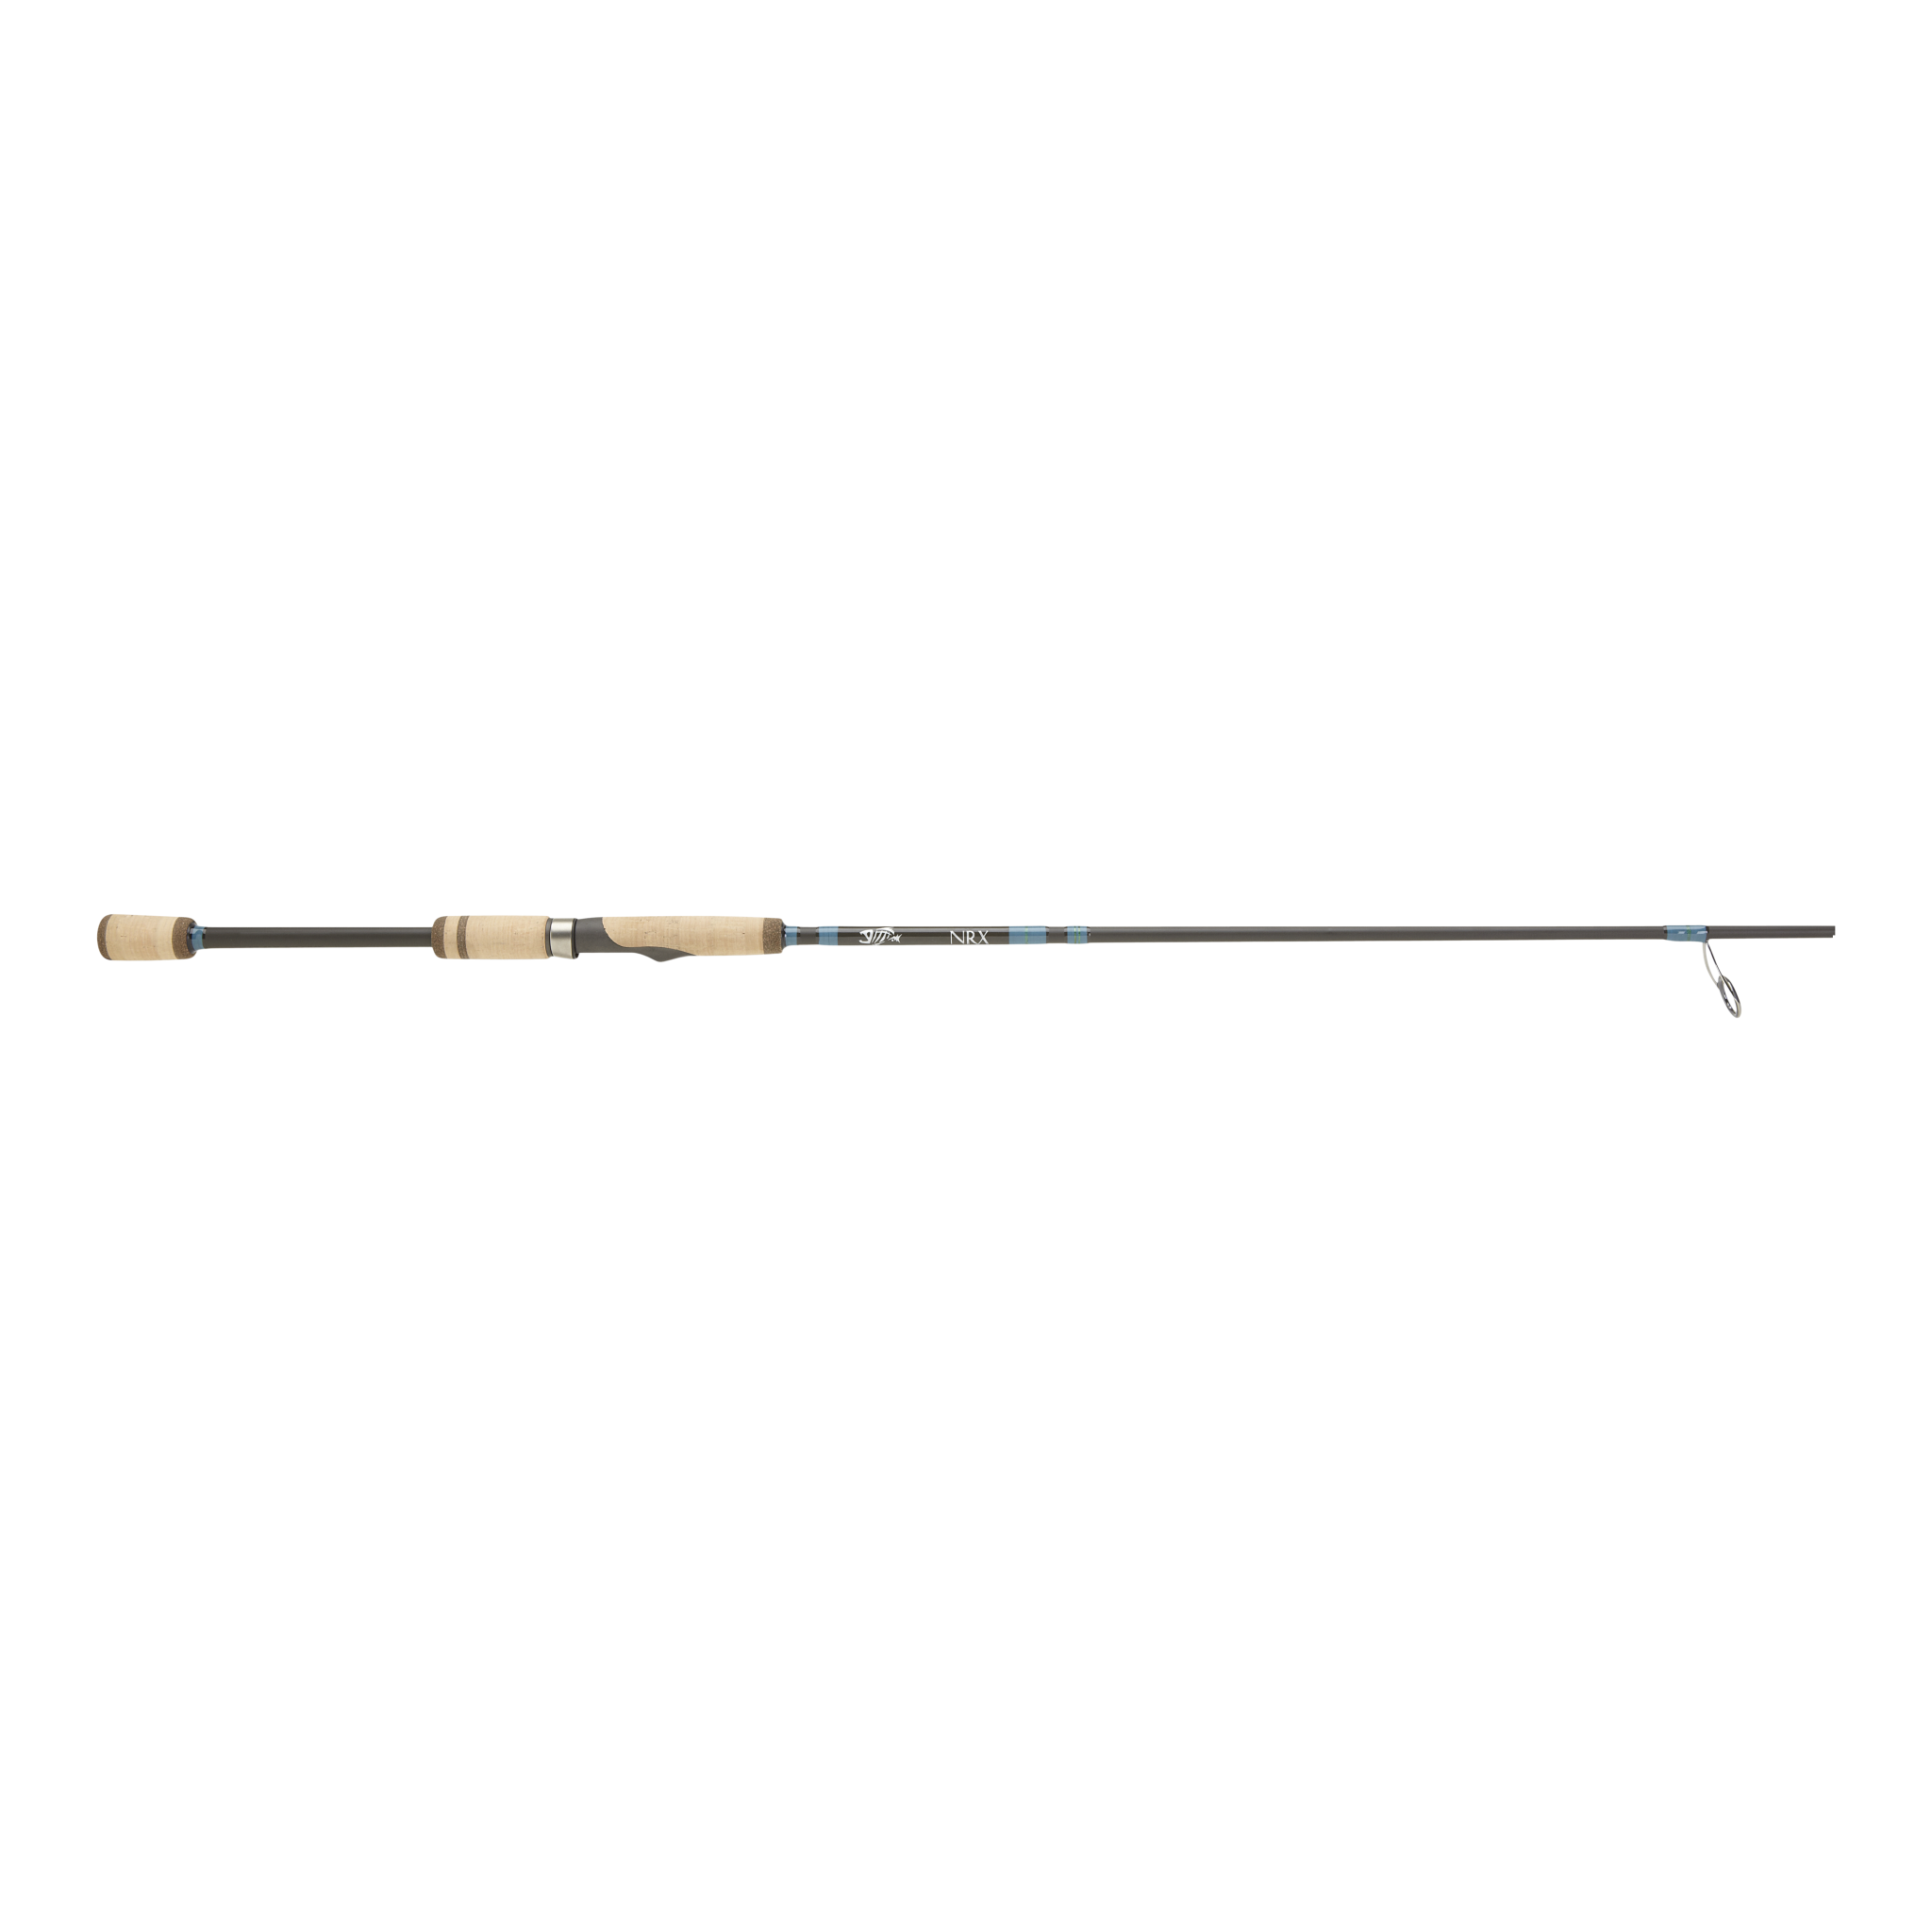 Favourite Fly Rods: the mighty mite NRX 7' 6 3 wt 